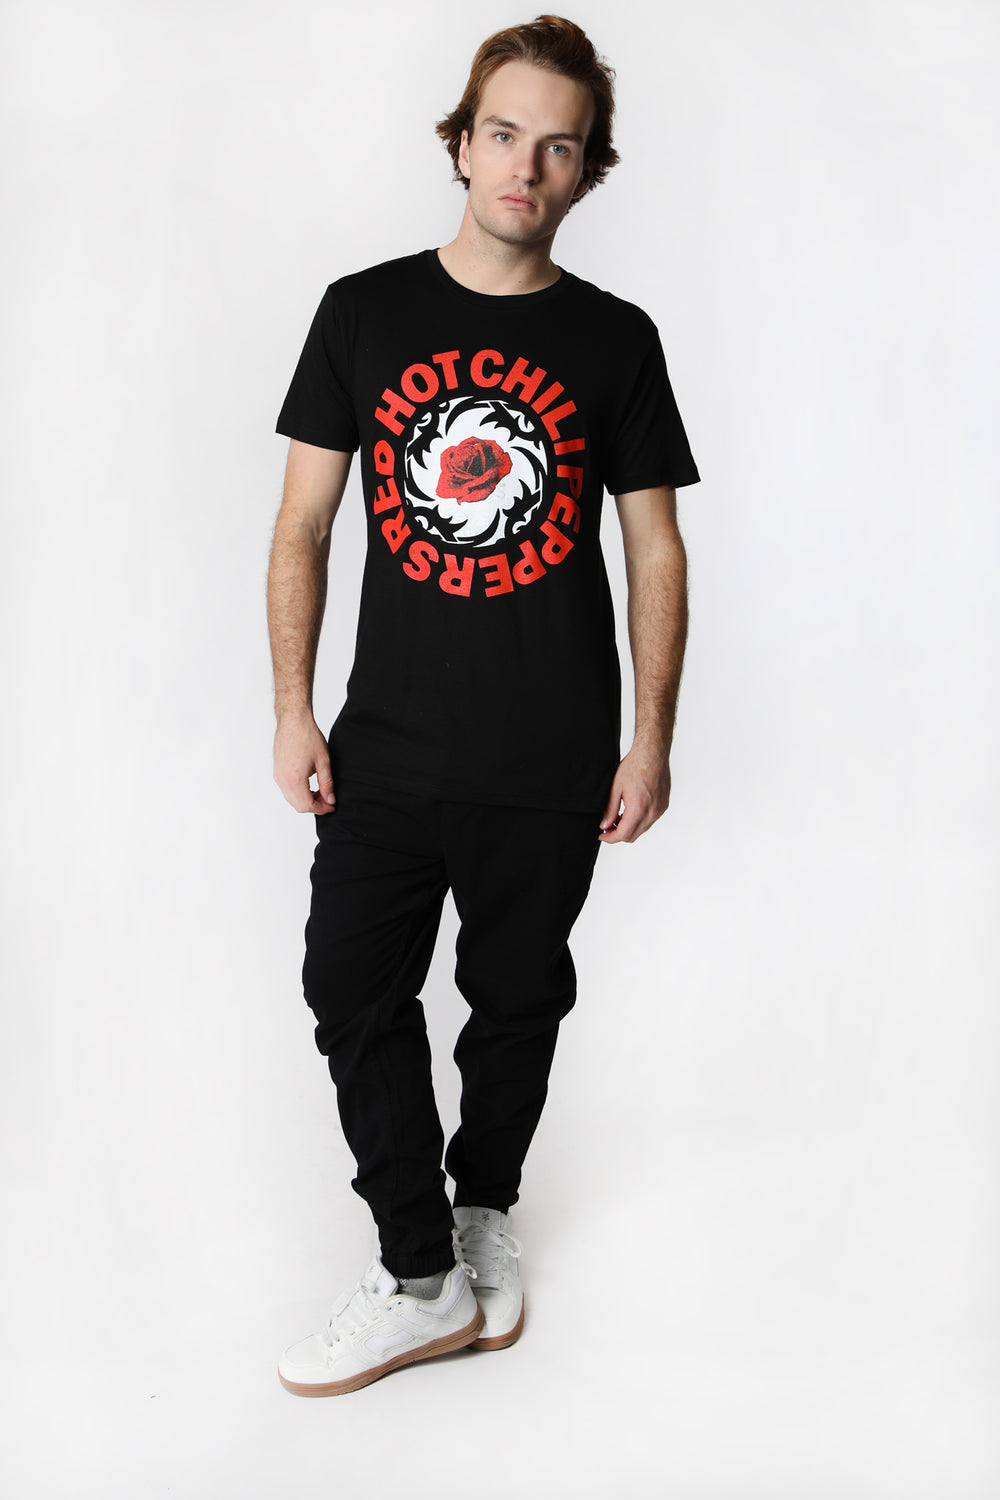 Mens Red Hot Chili Peppers Thorn Rose T-Shirt Mens Red Hot Chili Peppers Thorn Rose T-Shirt